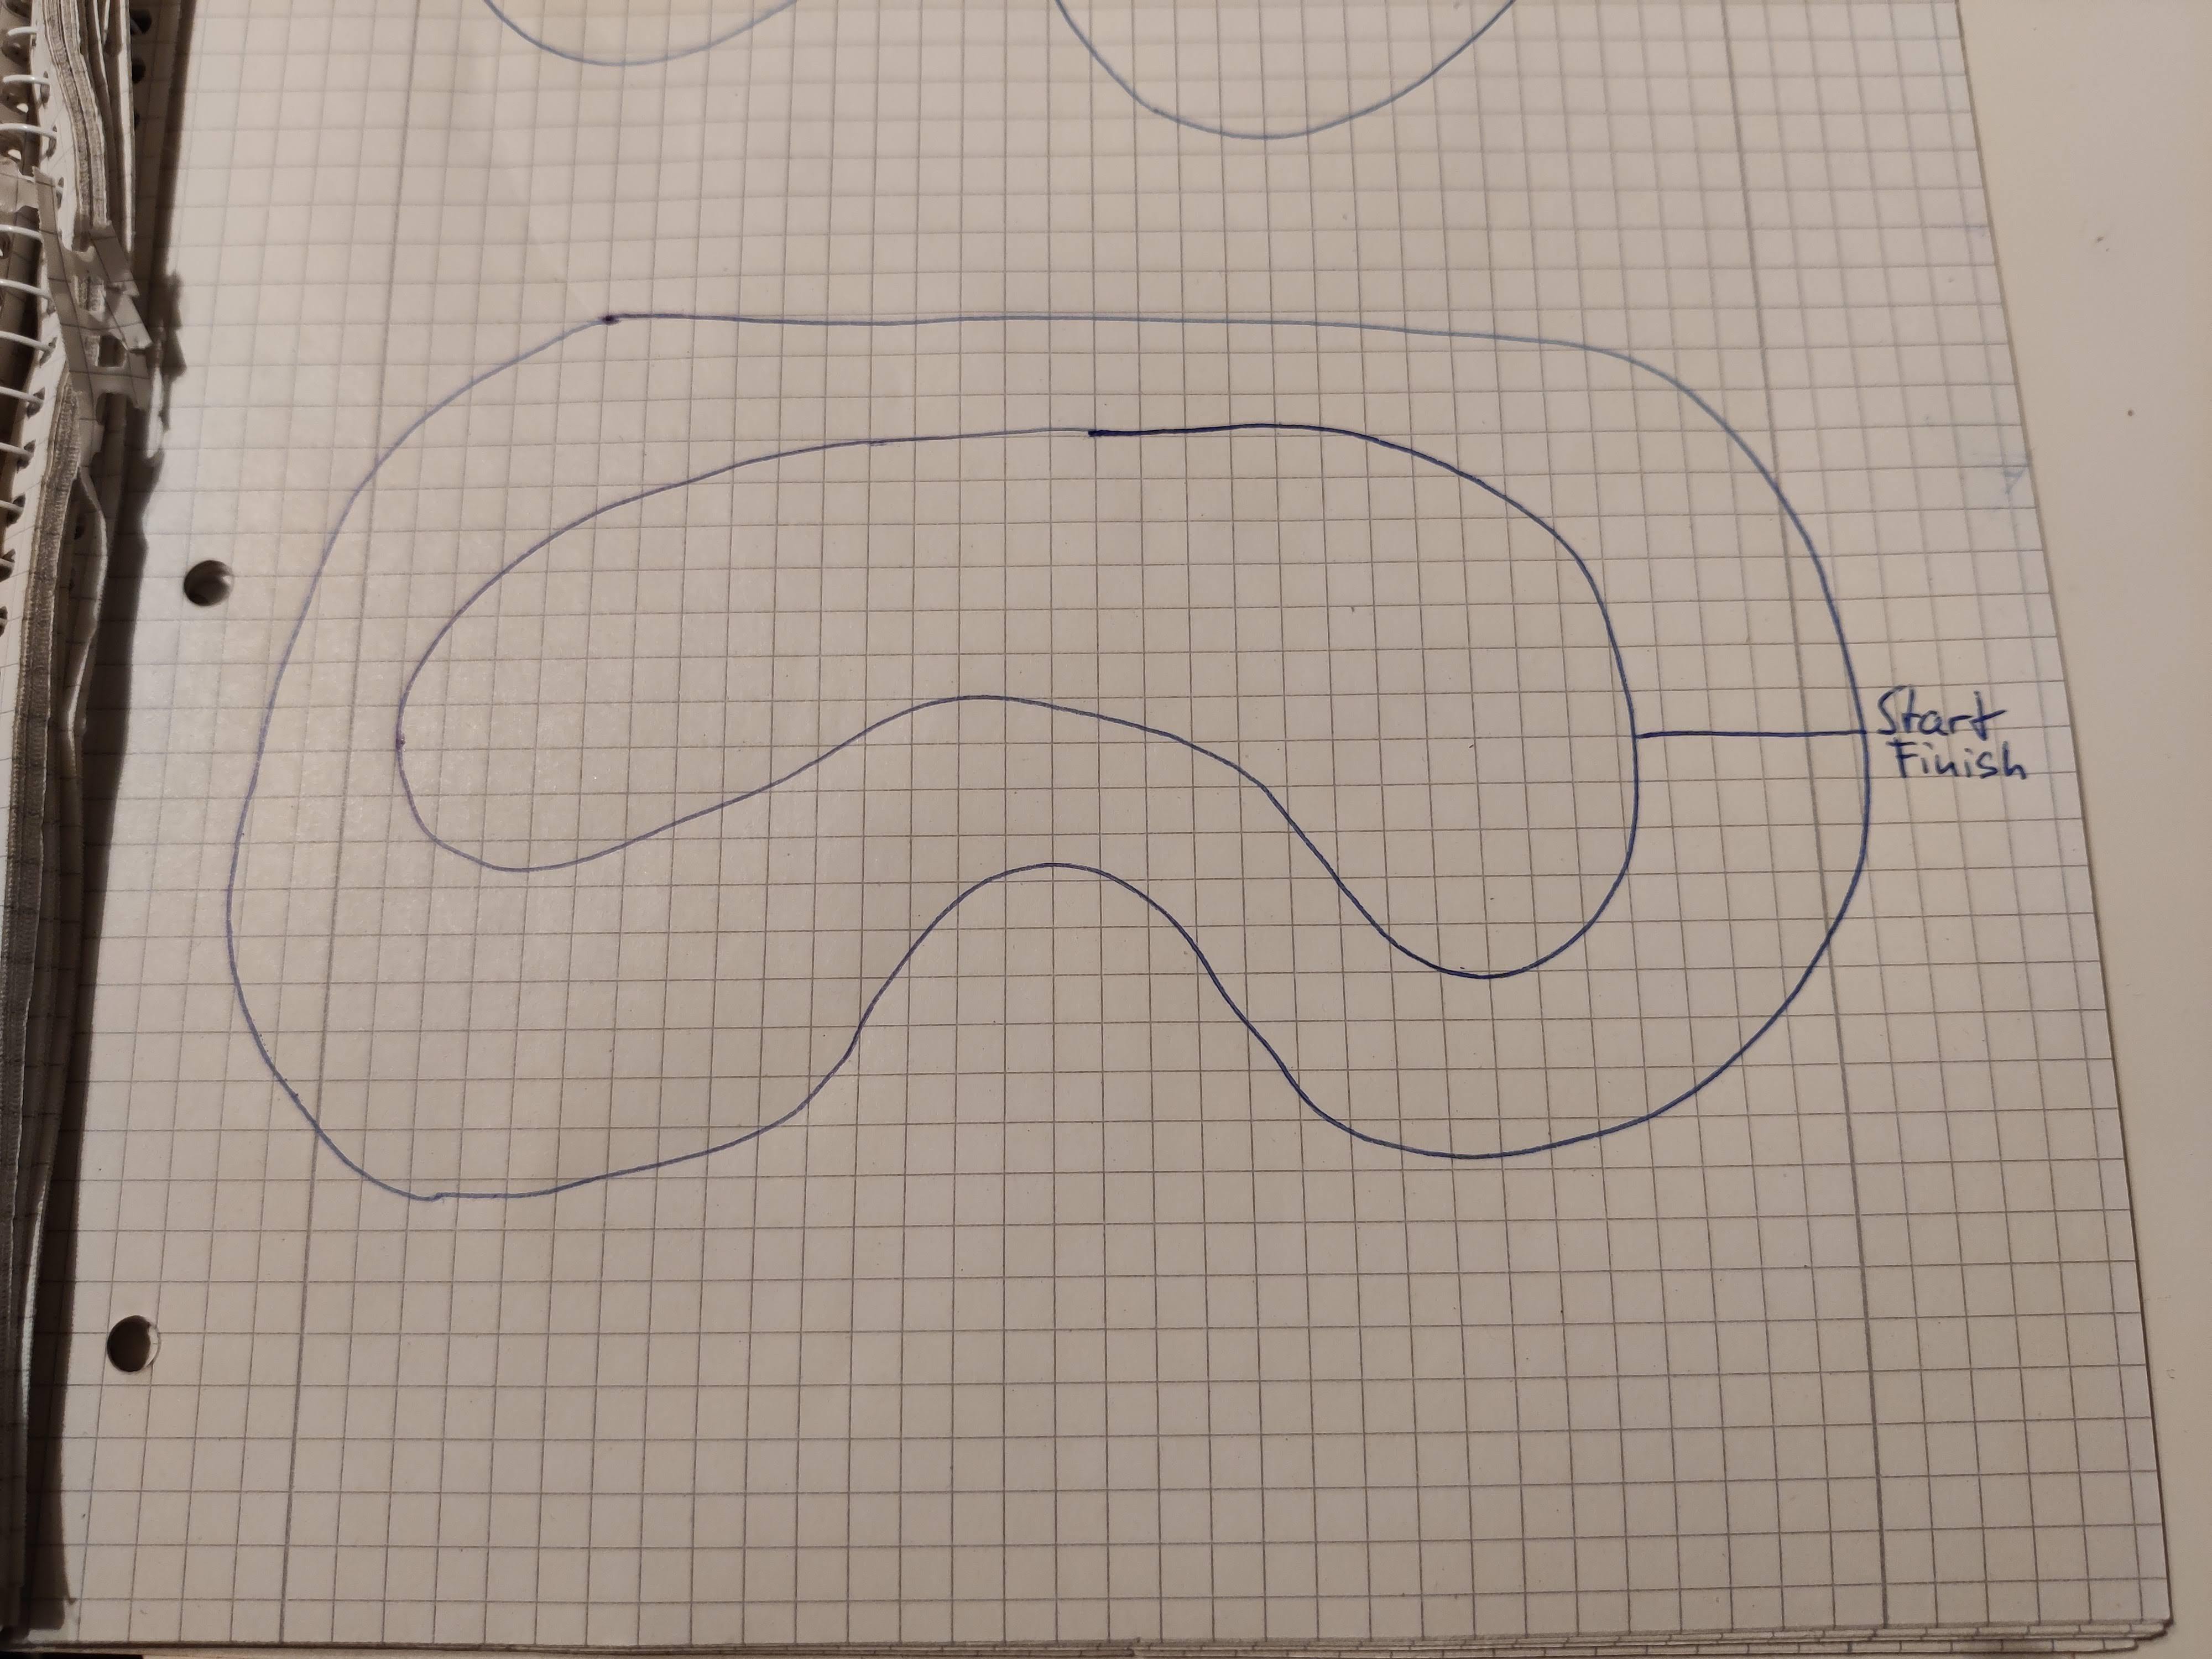 A race track on paper